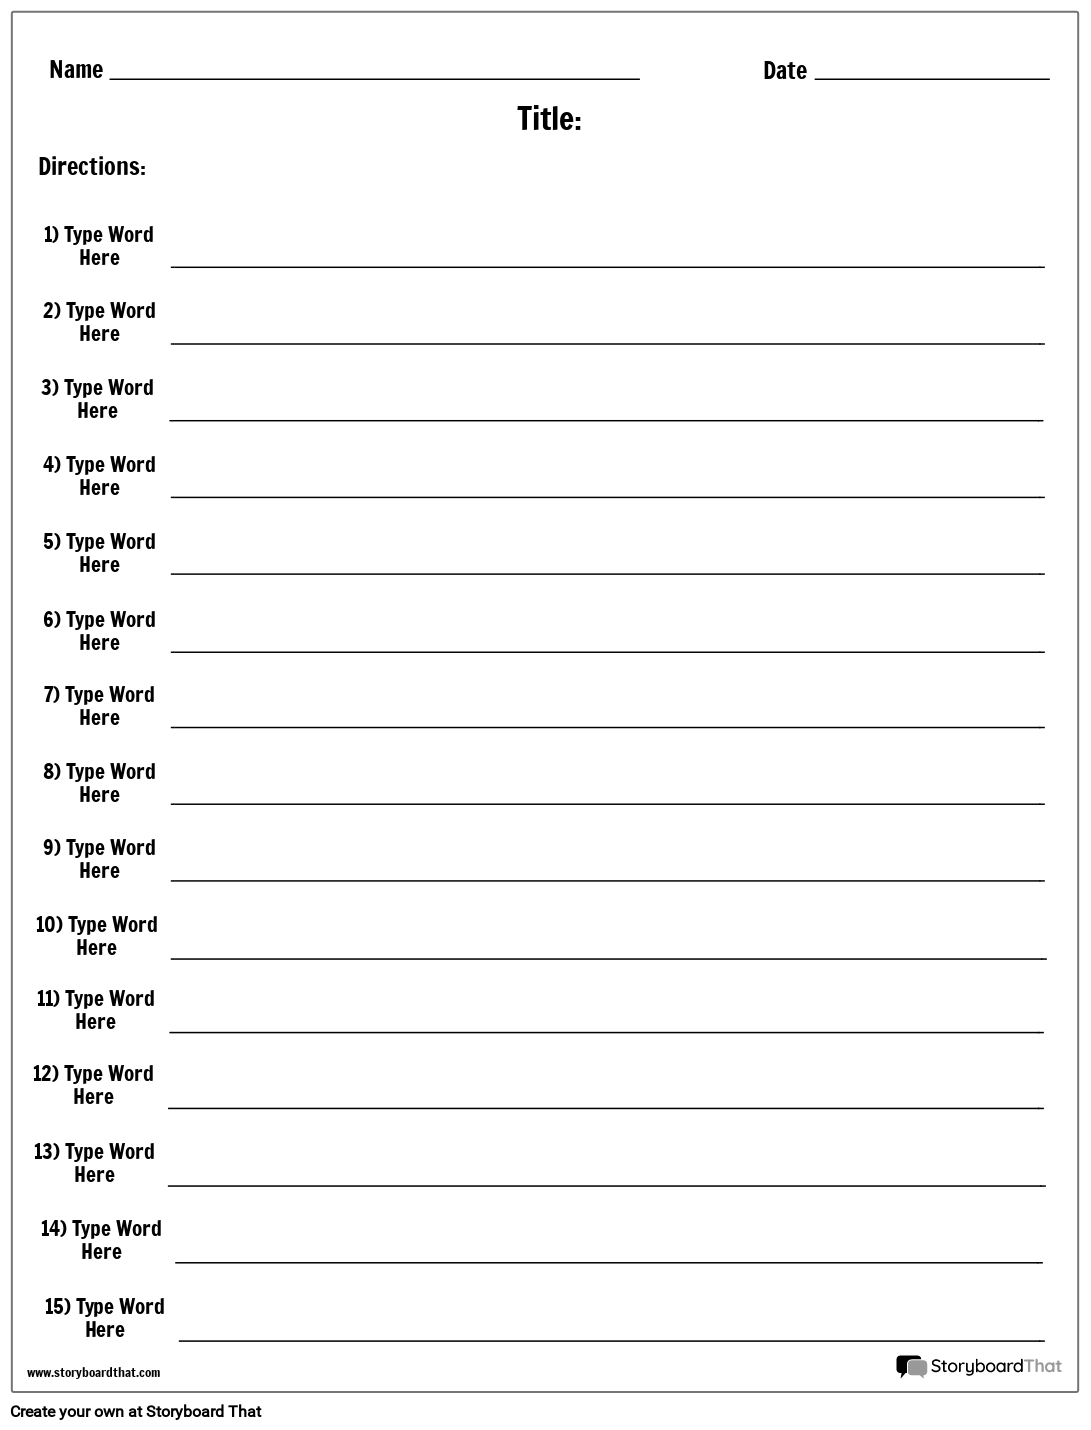 writing-your-own-definitions-worksheet-education-com-build-vocabulary